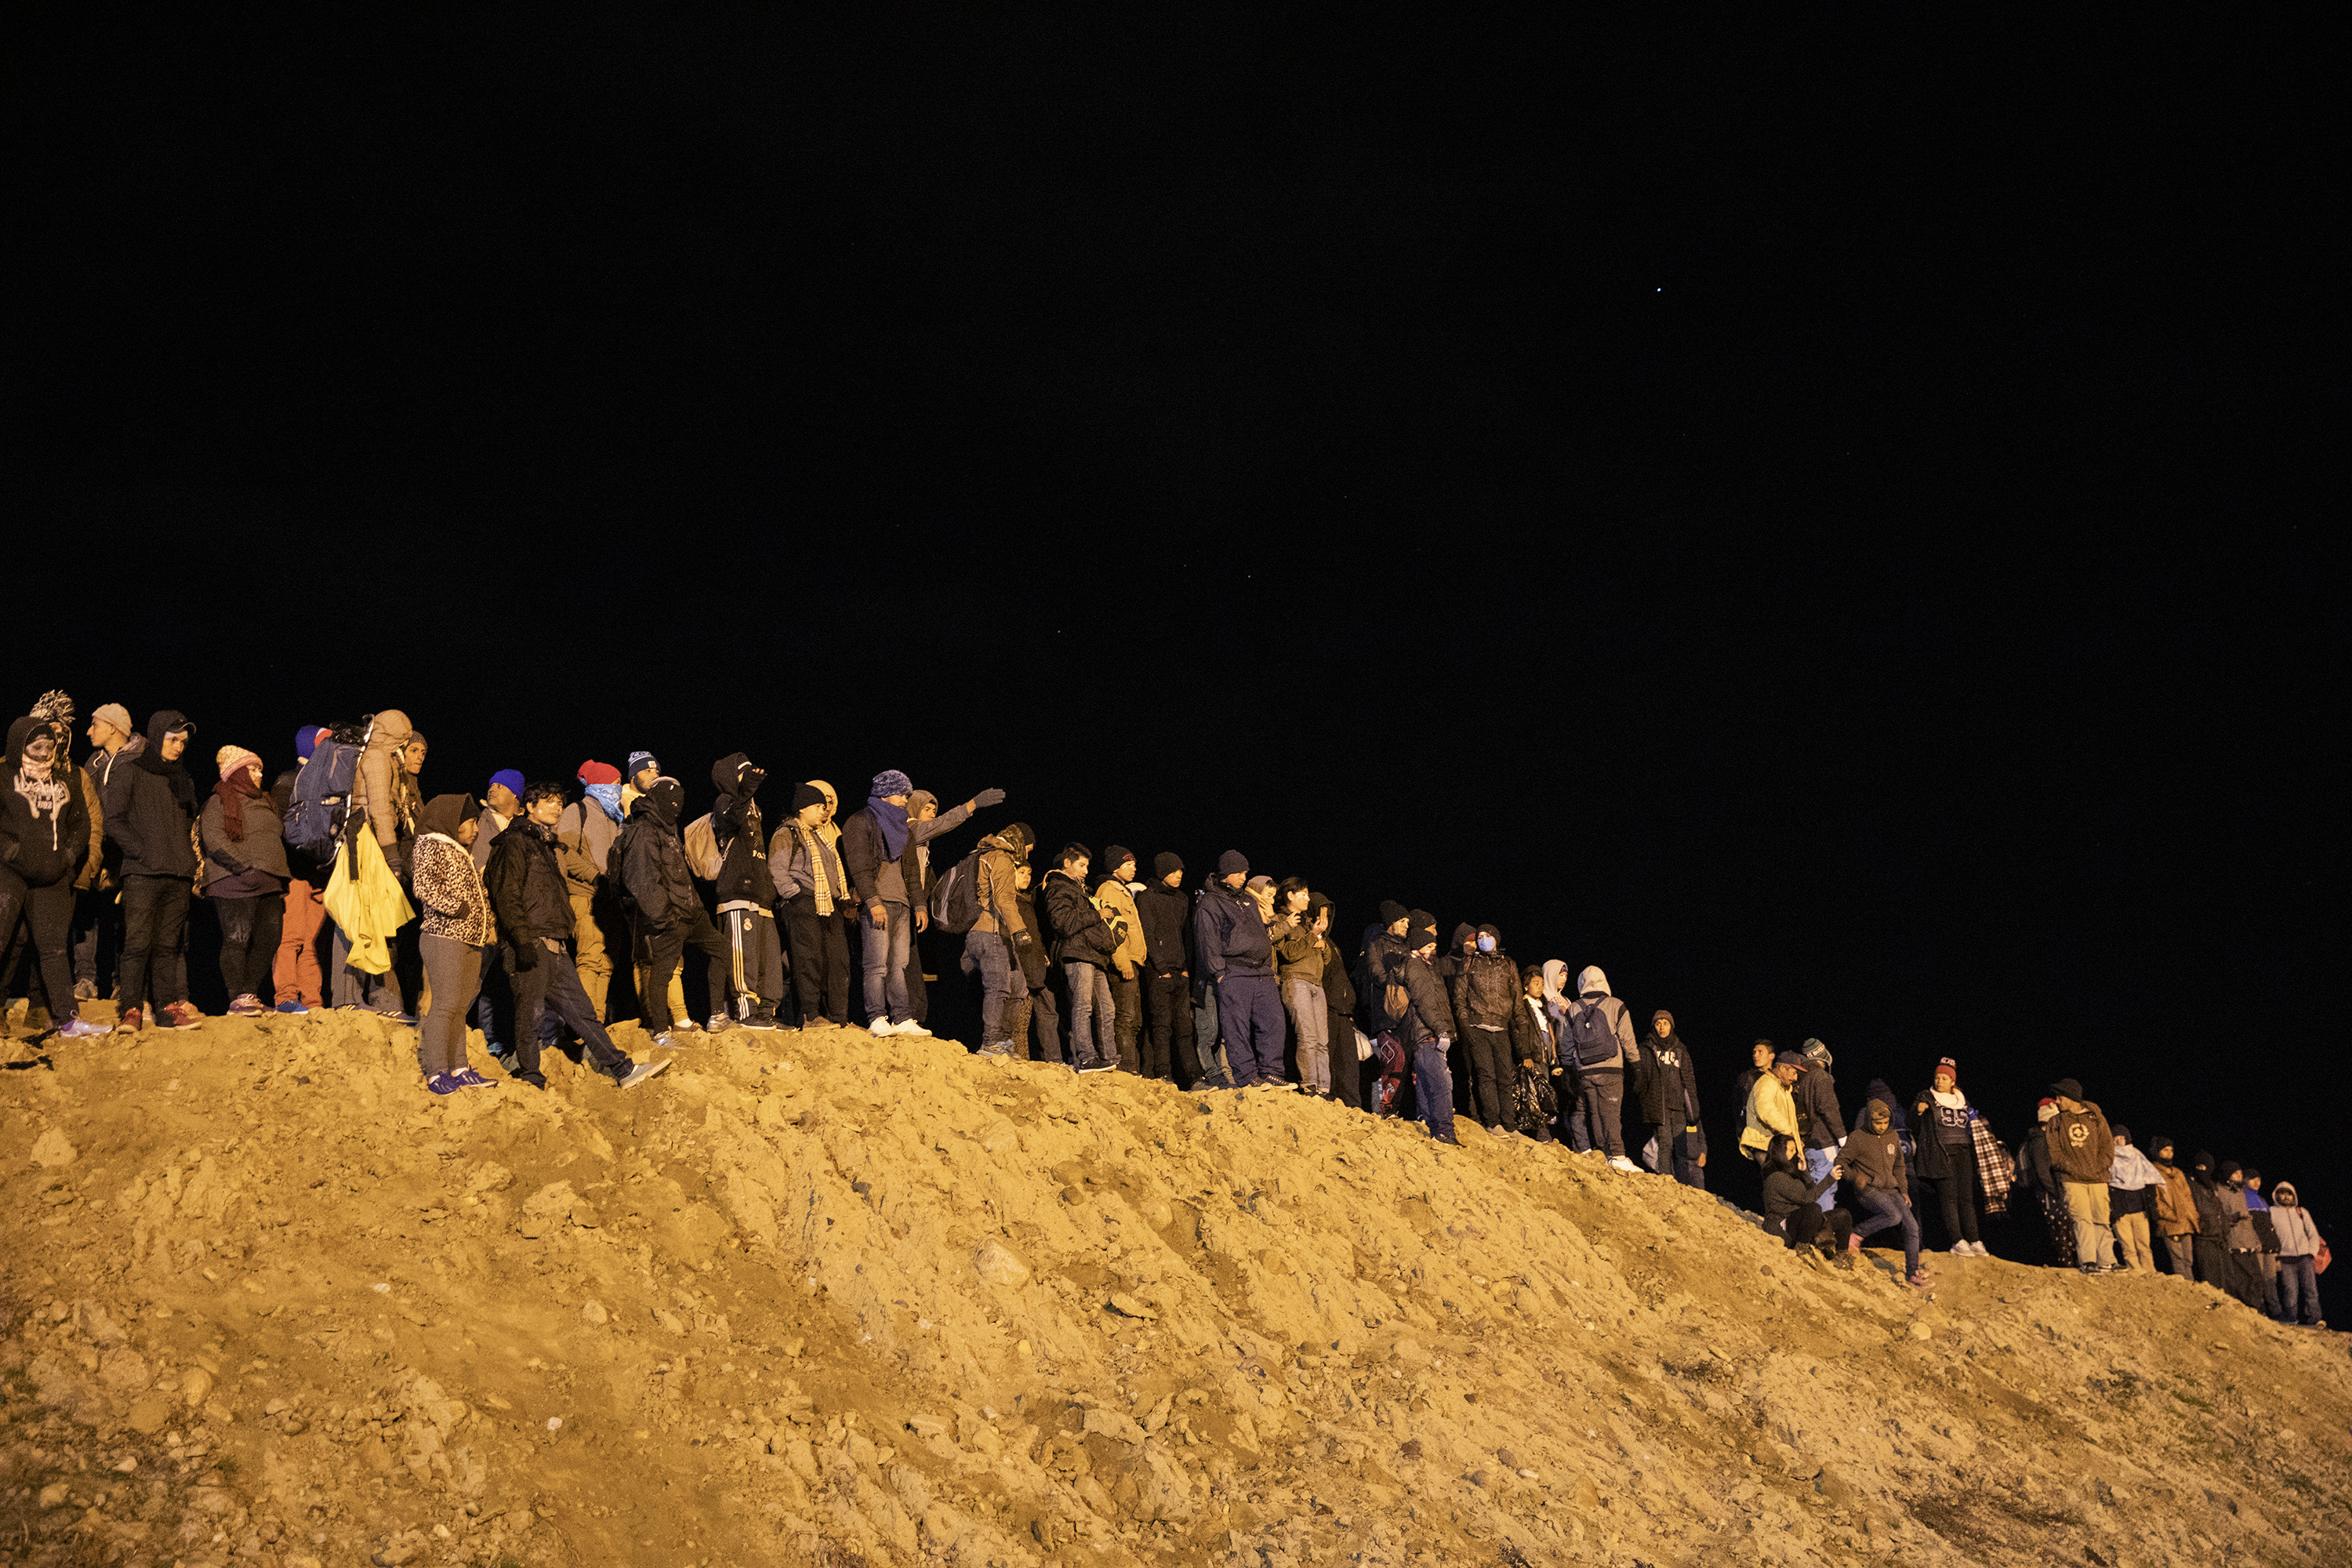 A group of Central American migrants wait to jump over the wall